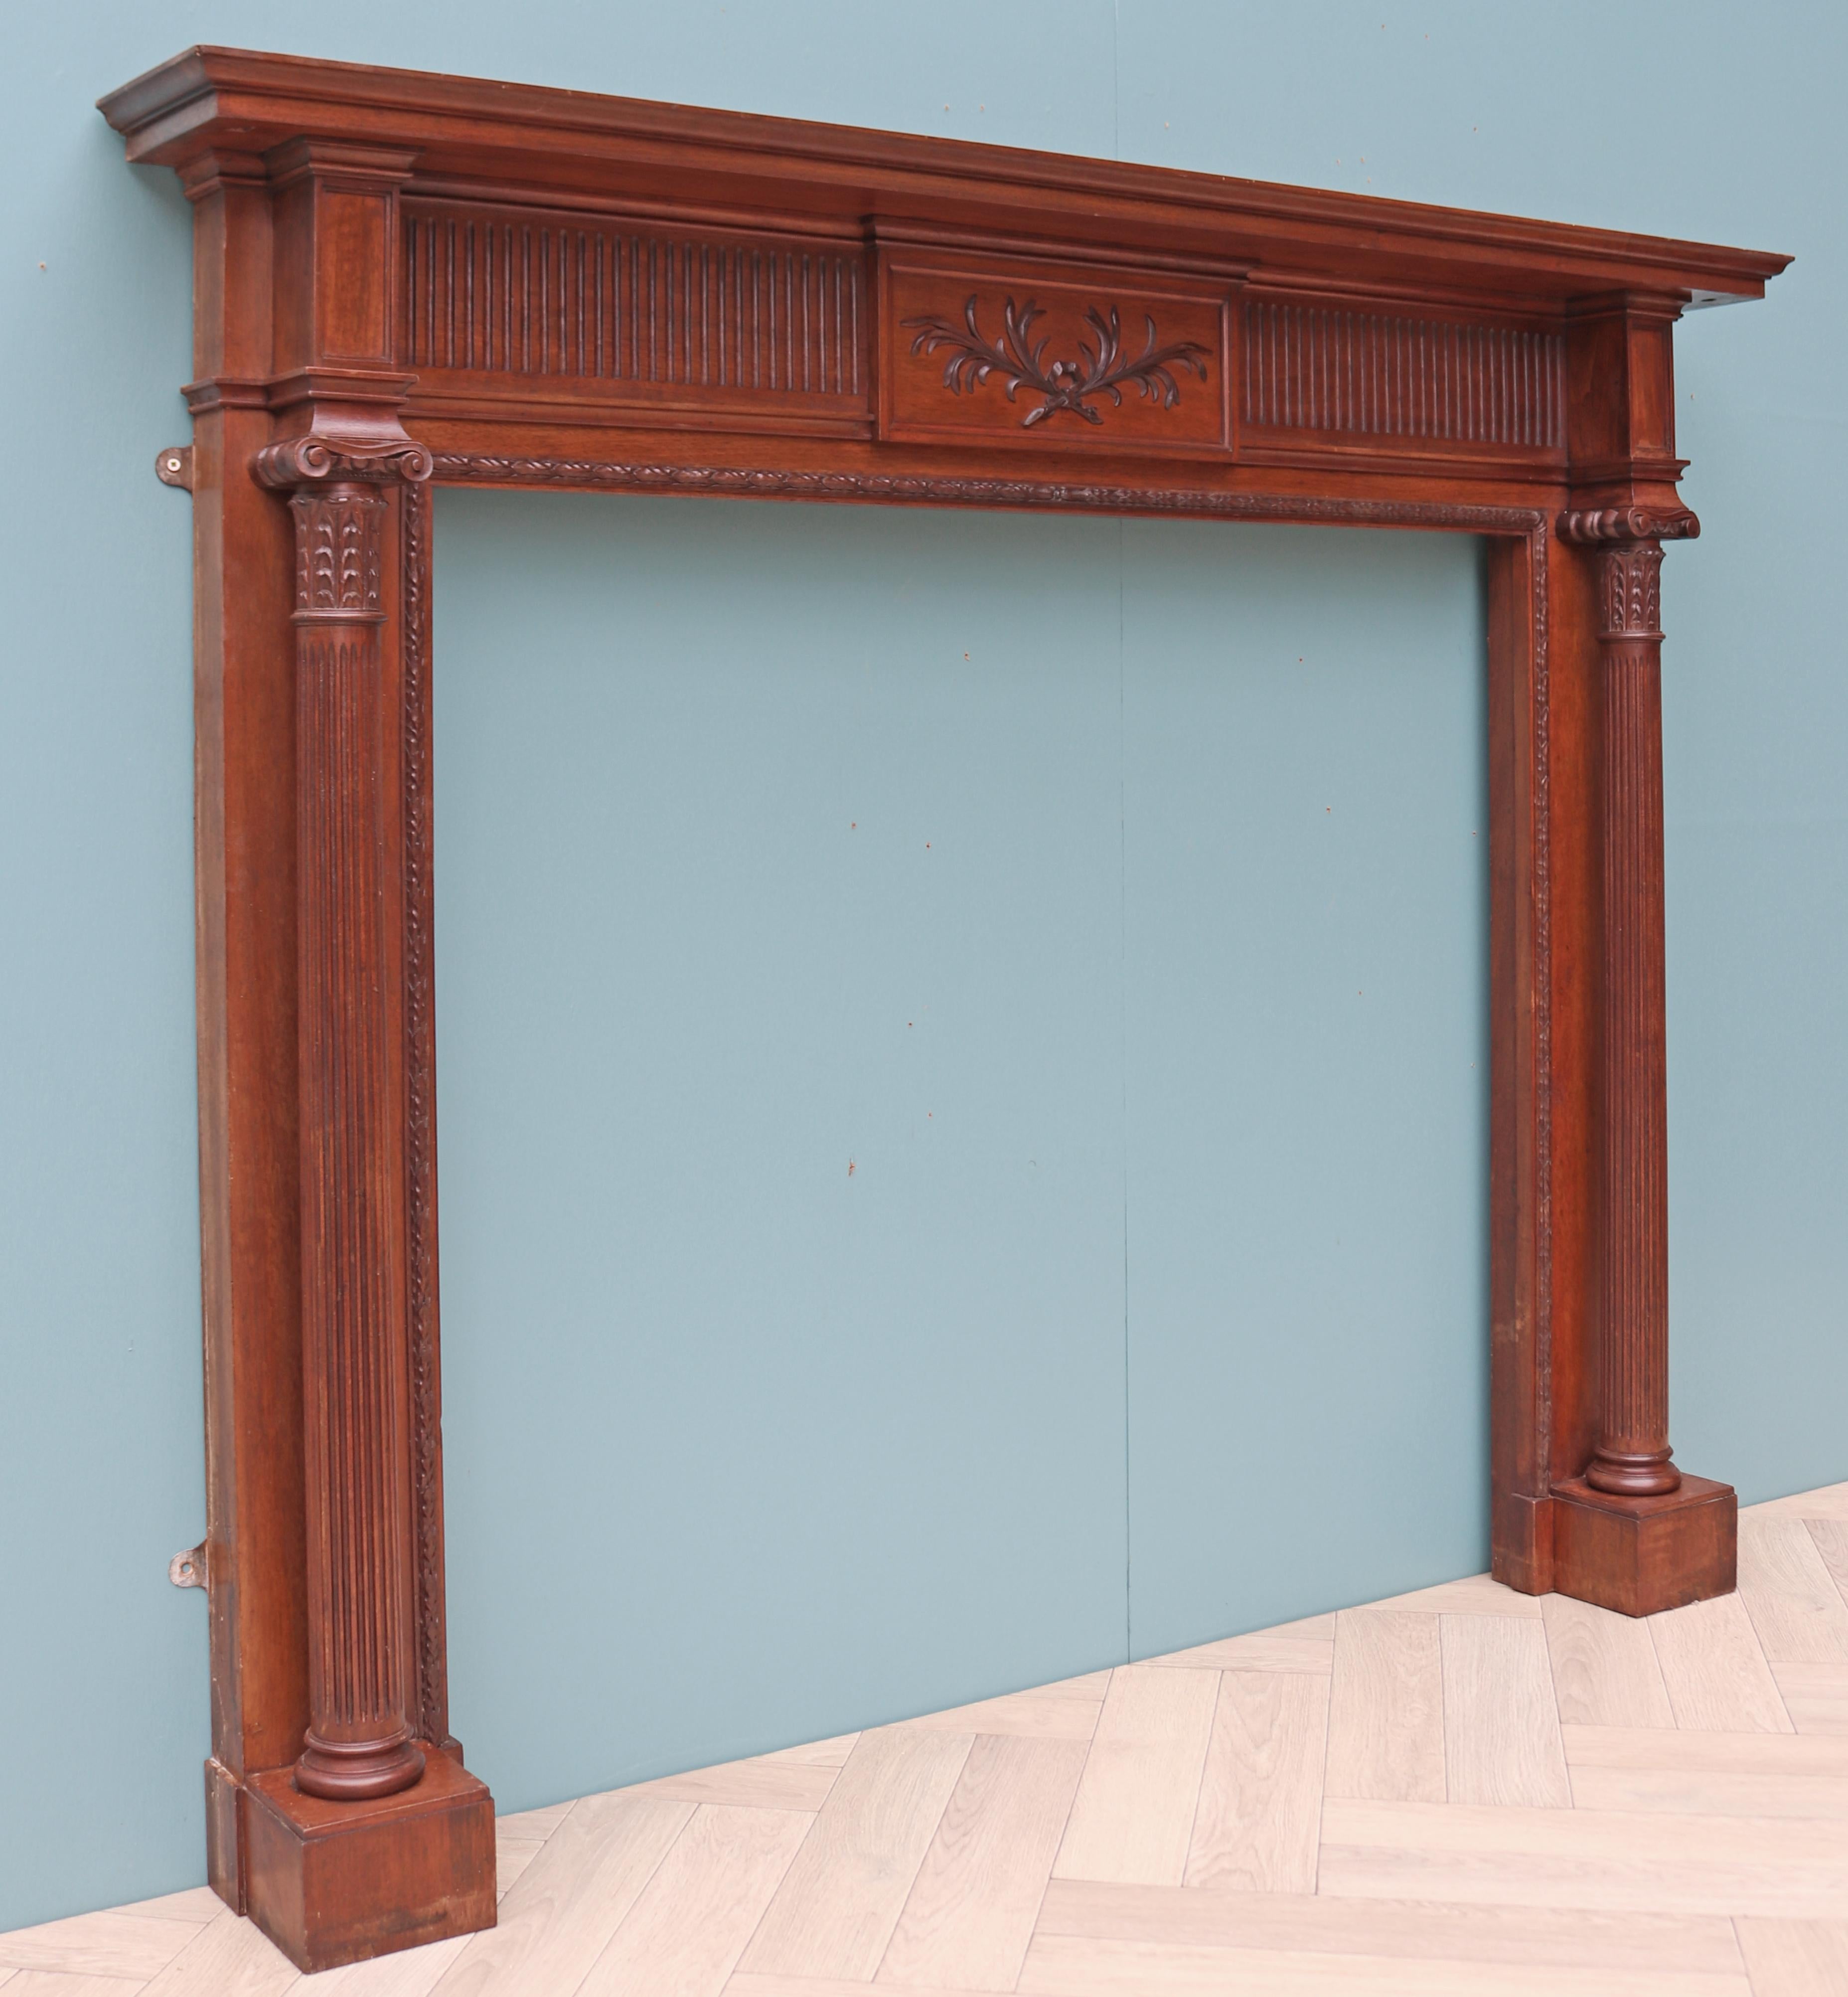 A late Victorian or Edwardian fireplace surround. This mantle-piece was salvaged from a house in Bristol.

Additional Dimensions:

Opening Height 96 cm

Opening Width 106 cm

Width between the outside of foot blocks 137 cm